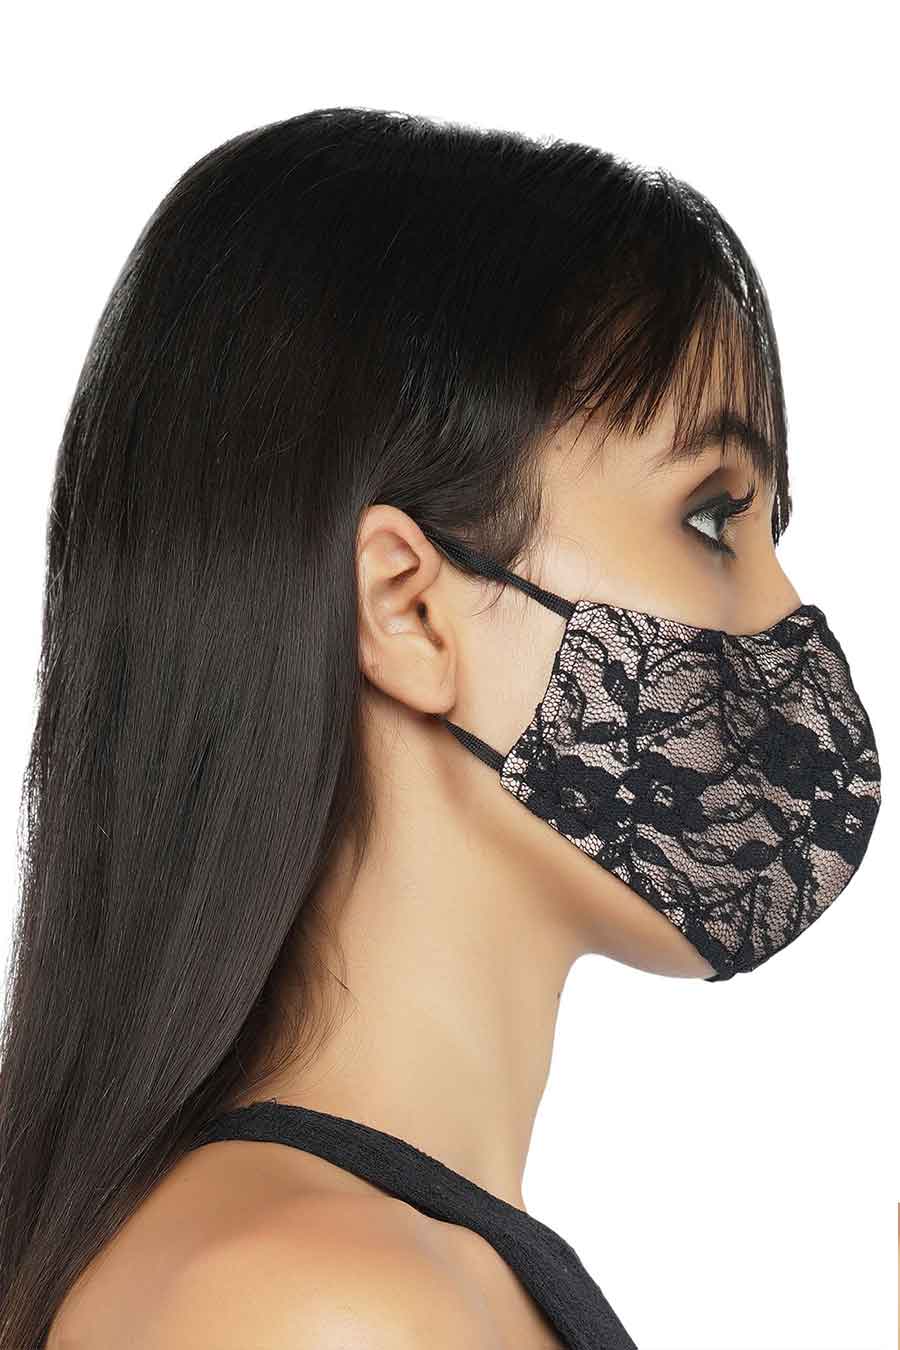 Black Lace With Contrast Lining 3 Ply Mask